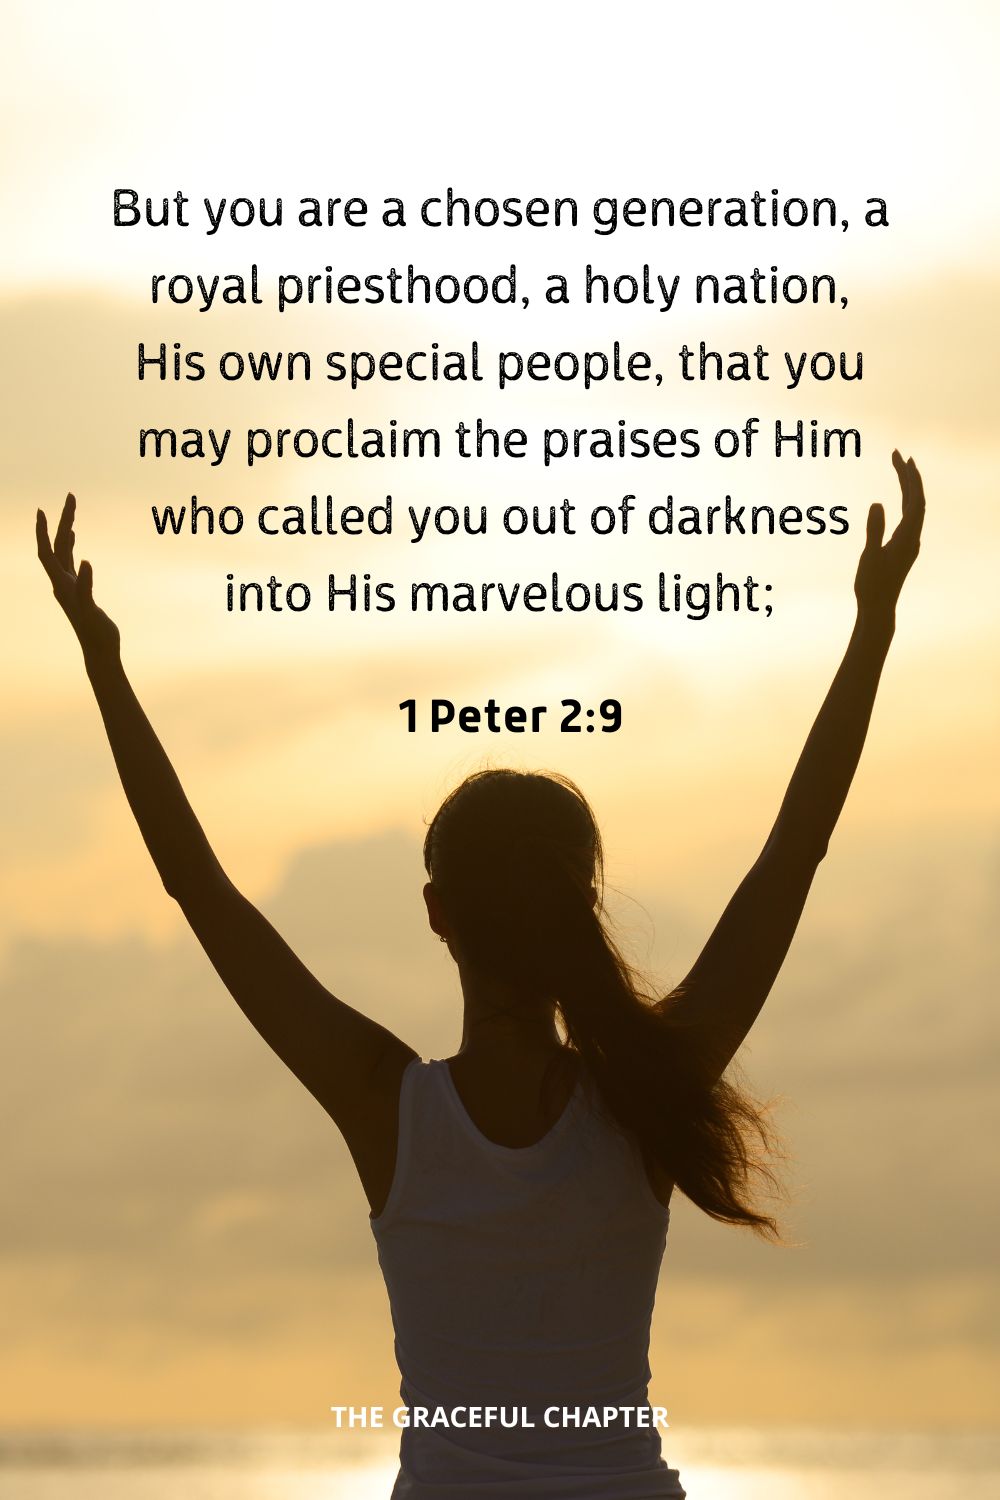 But you are a chosen generation, a royal priesthood, a holy nation, His own special people, that you may proclaim the praises of Him who called you out of darkness into His marvelous light;